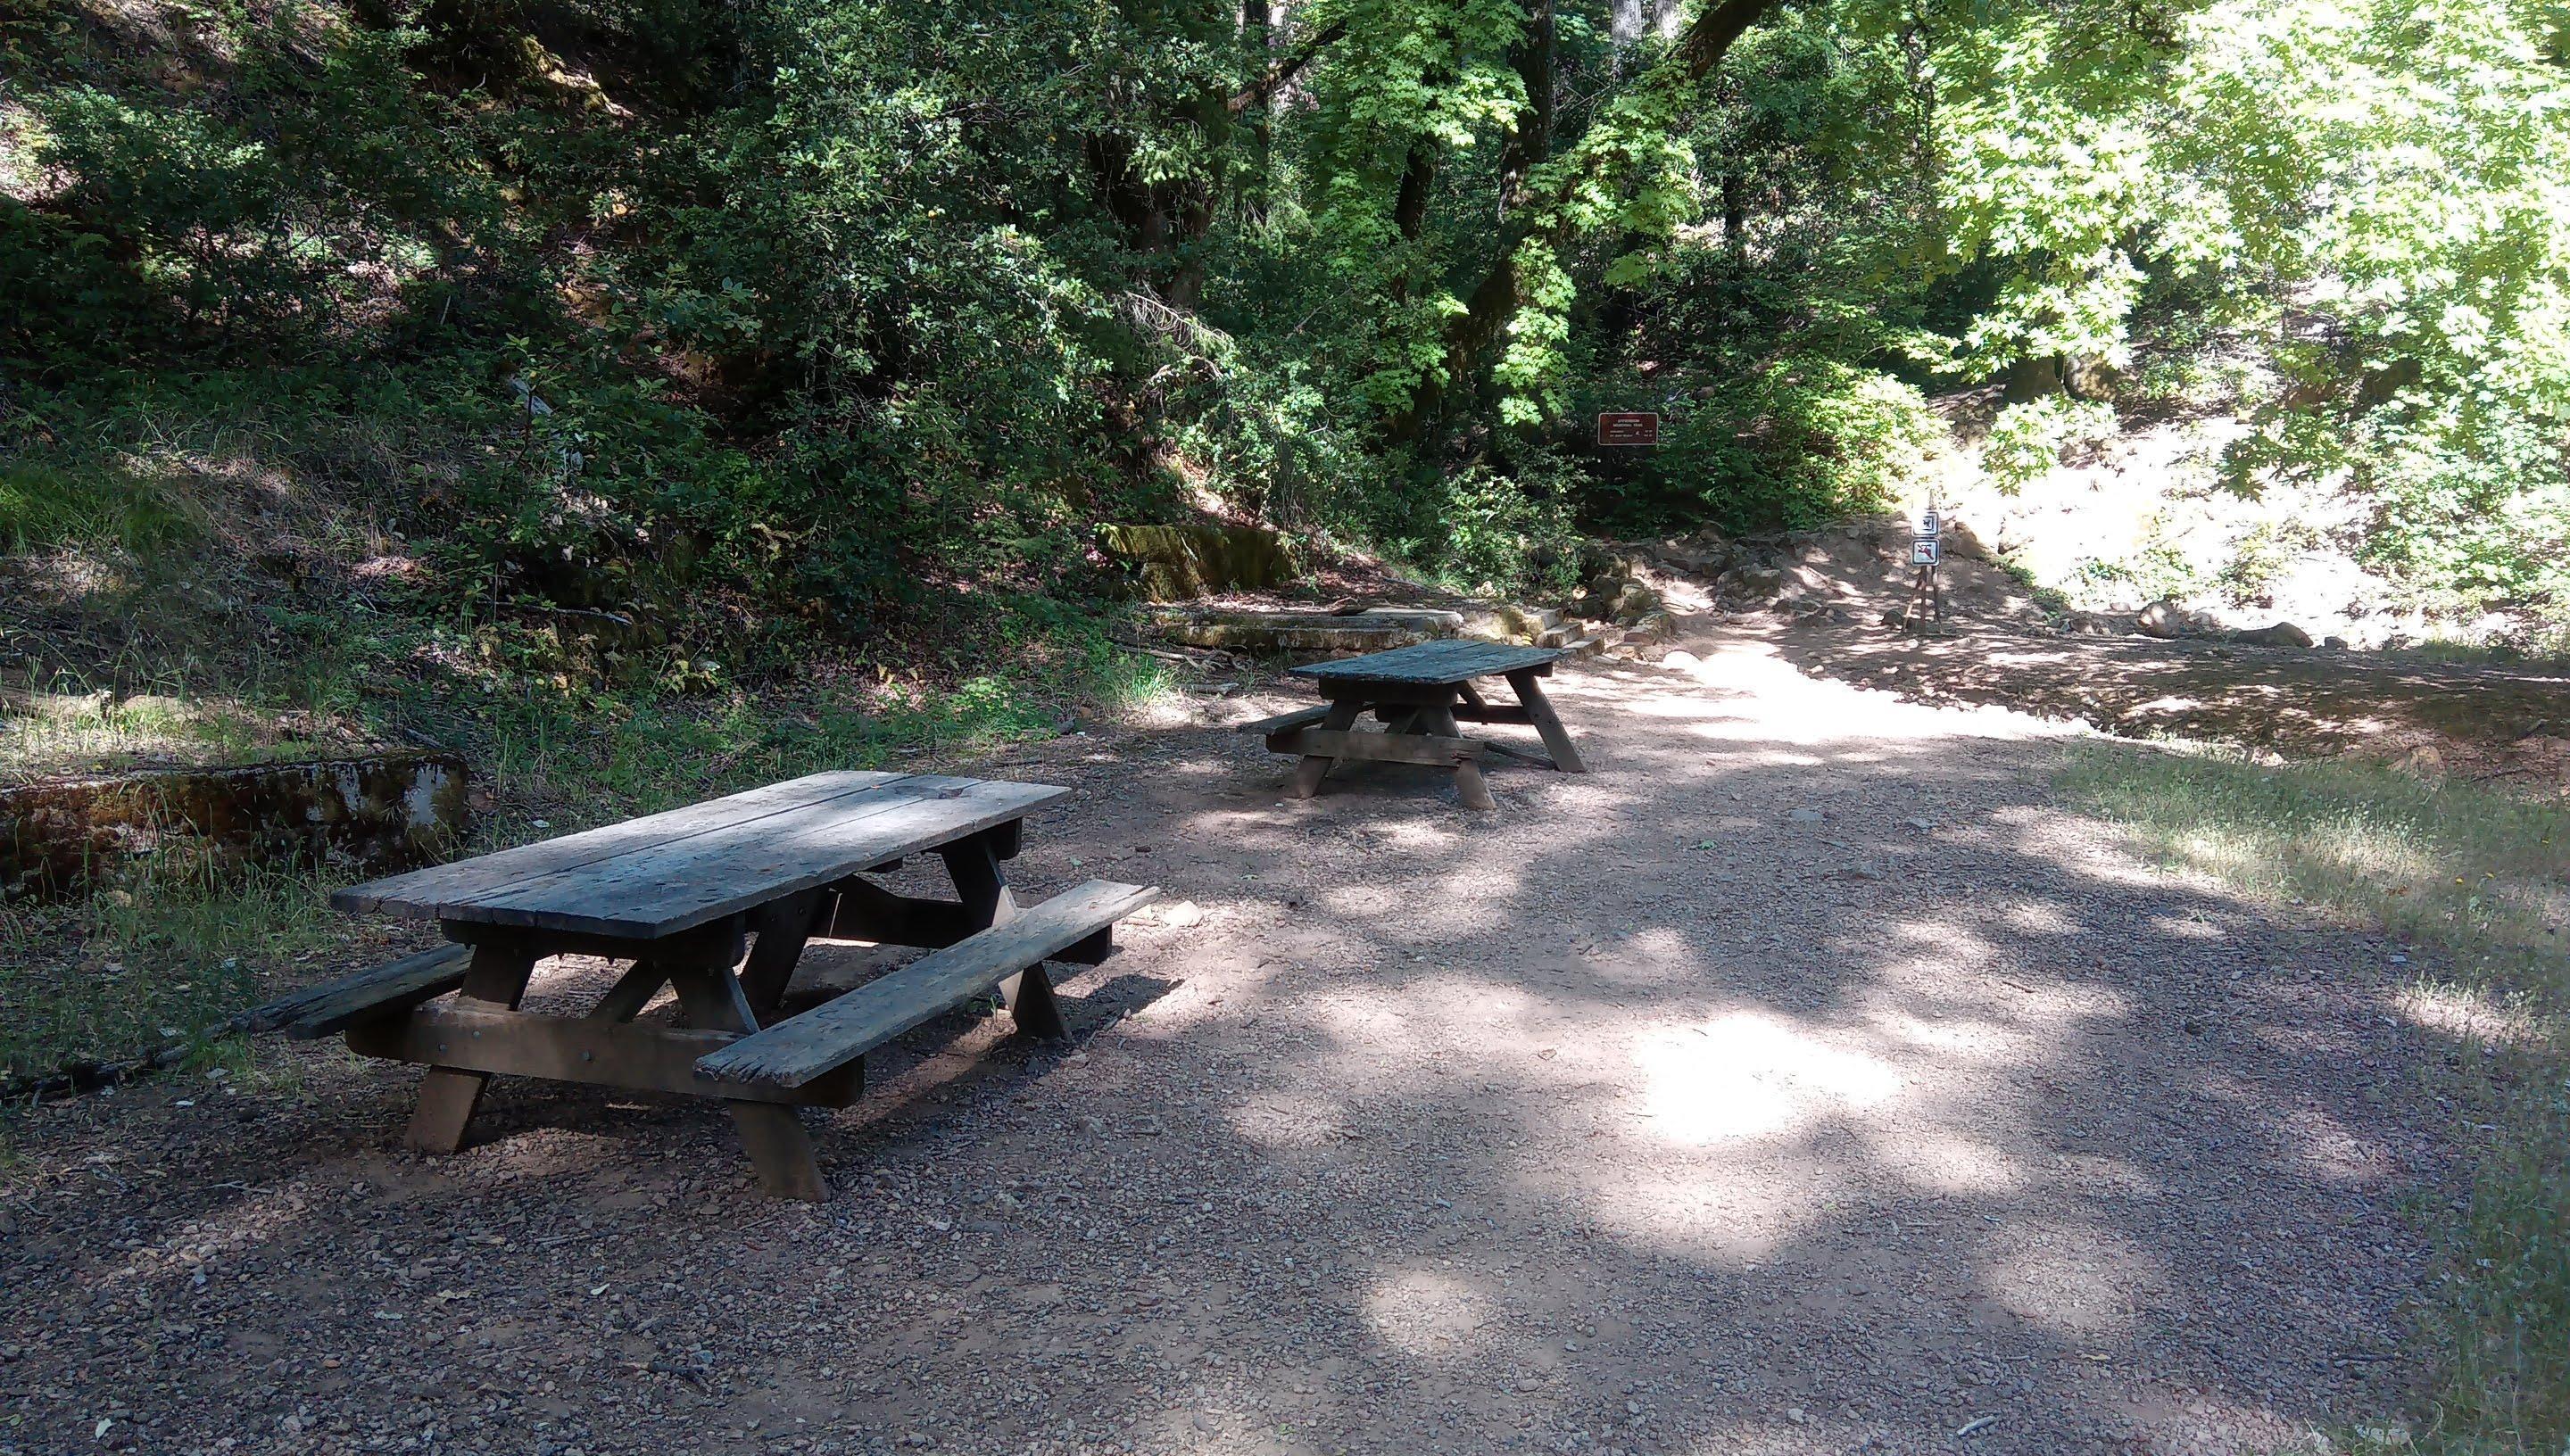 Tables at the trail head